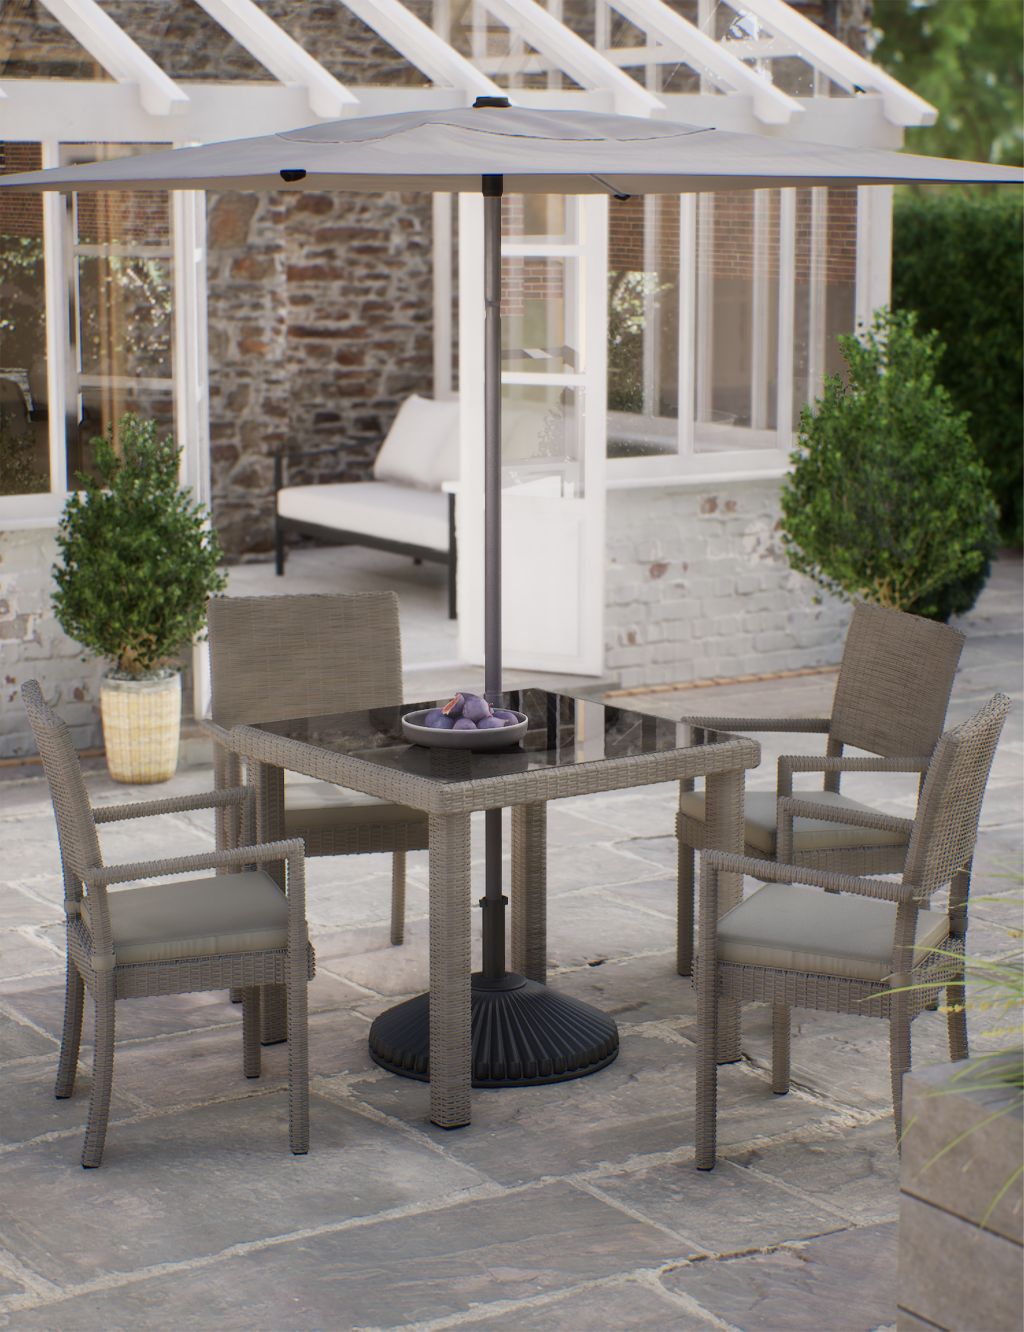 Marlow 4 Seater Garden Table and Chairs